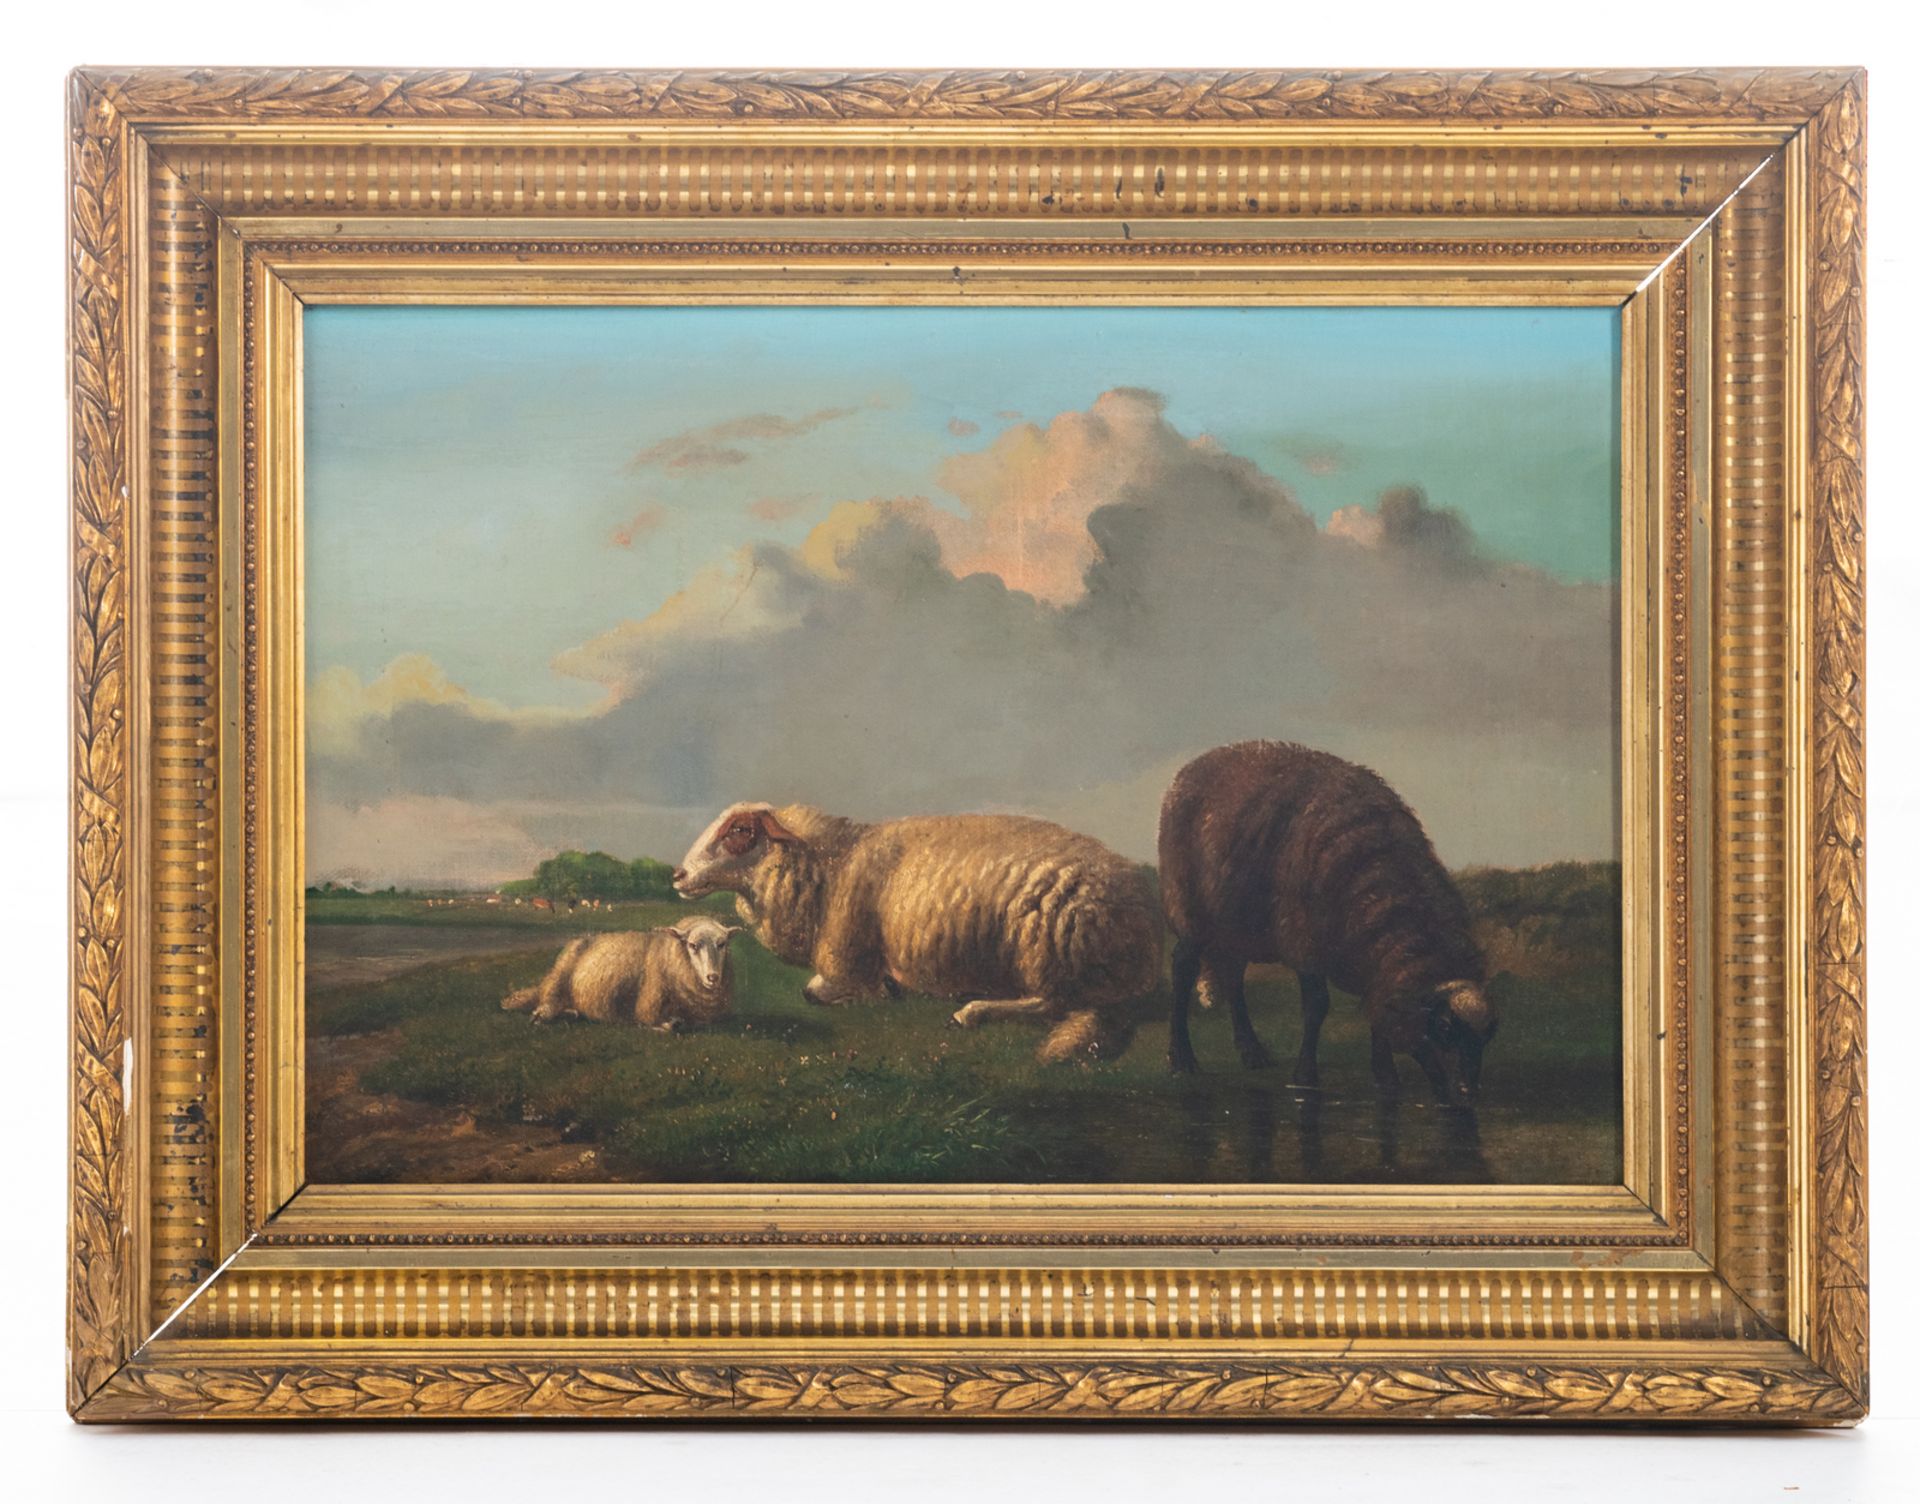 Verwee L.P., sheep in a meadow, oil on canvas, 37 x 54 cm - Image 2 of 4